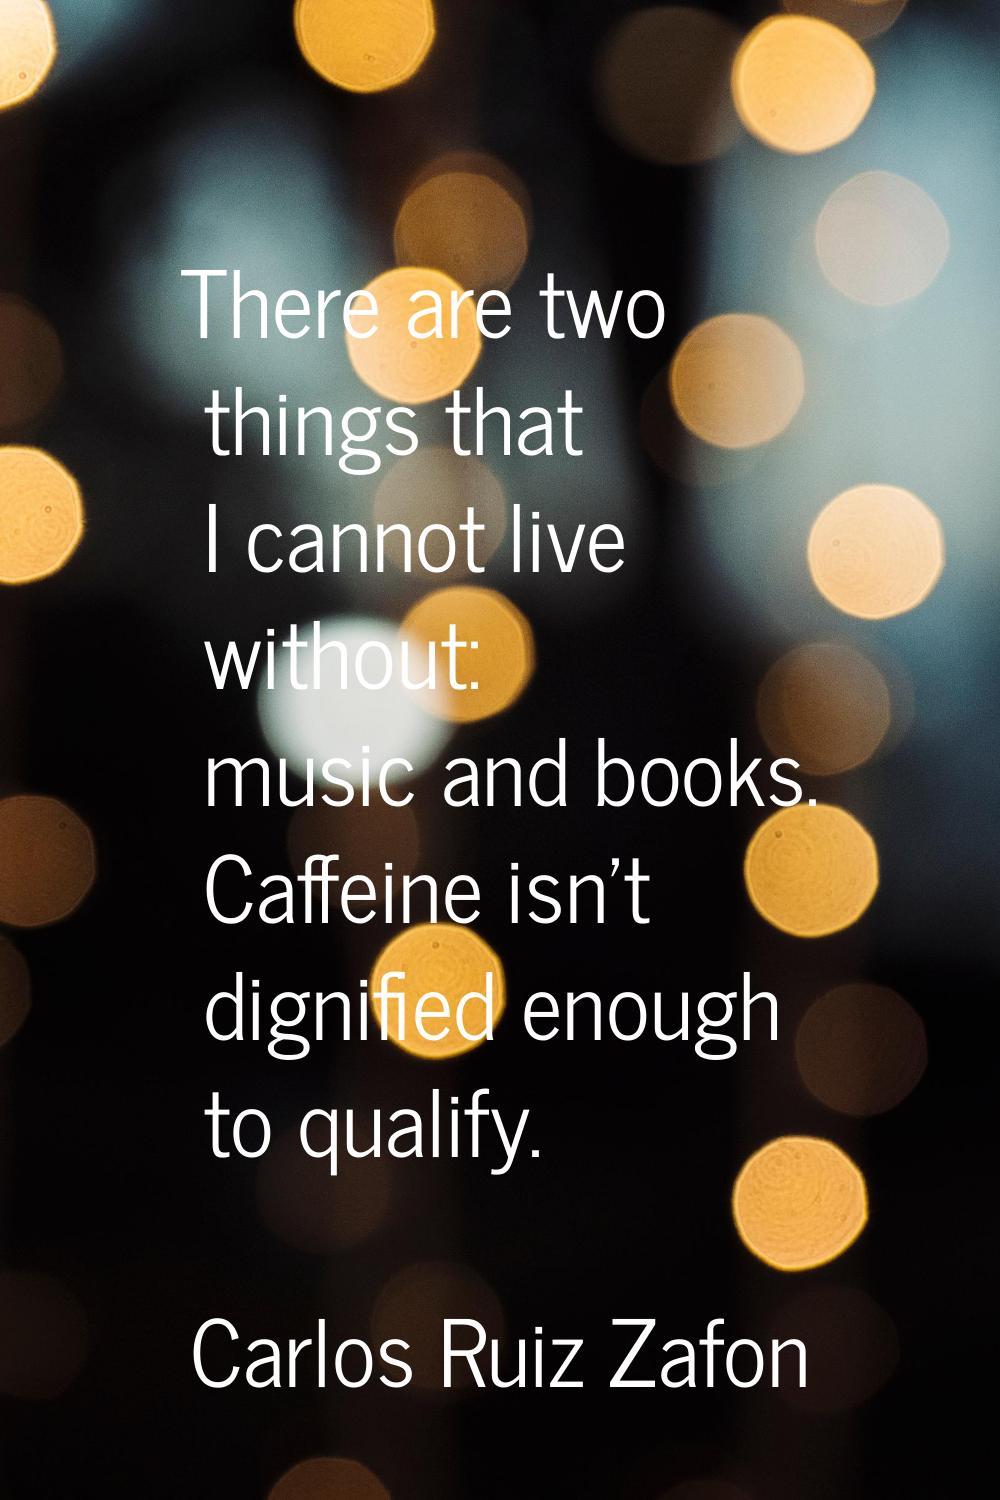 There are two things that I cannot live without: music and books. Caffeine isn't dignified enough t